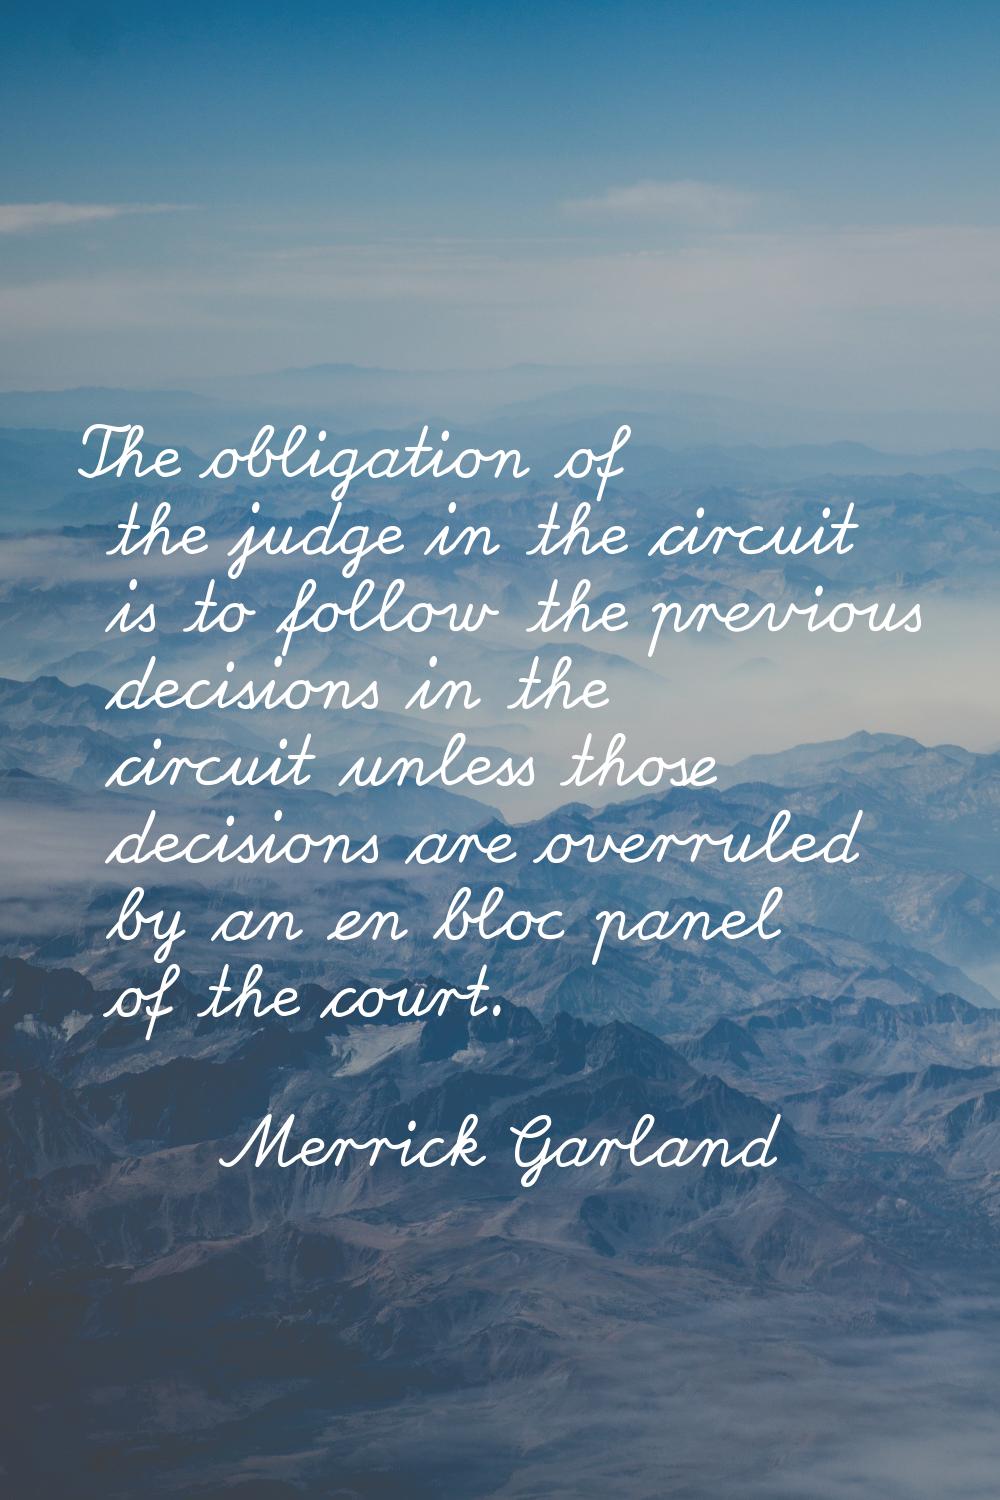 The obligation of the judge in the circuit is to follow the previous decisions in the circuit unles